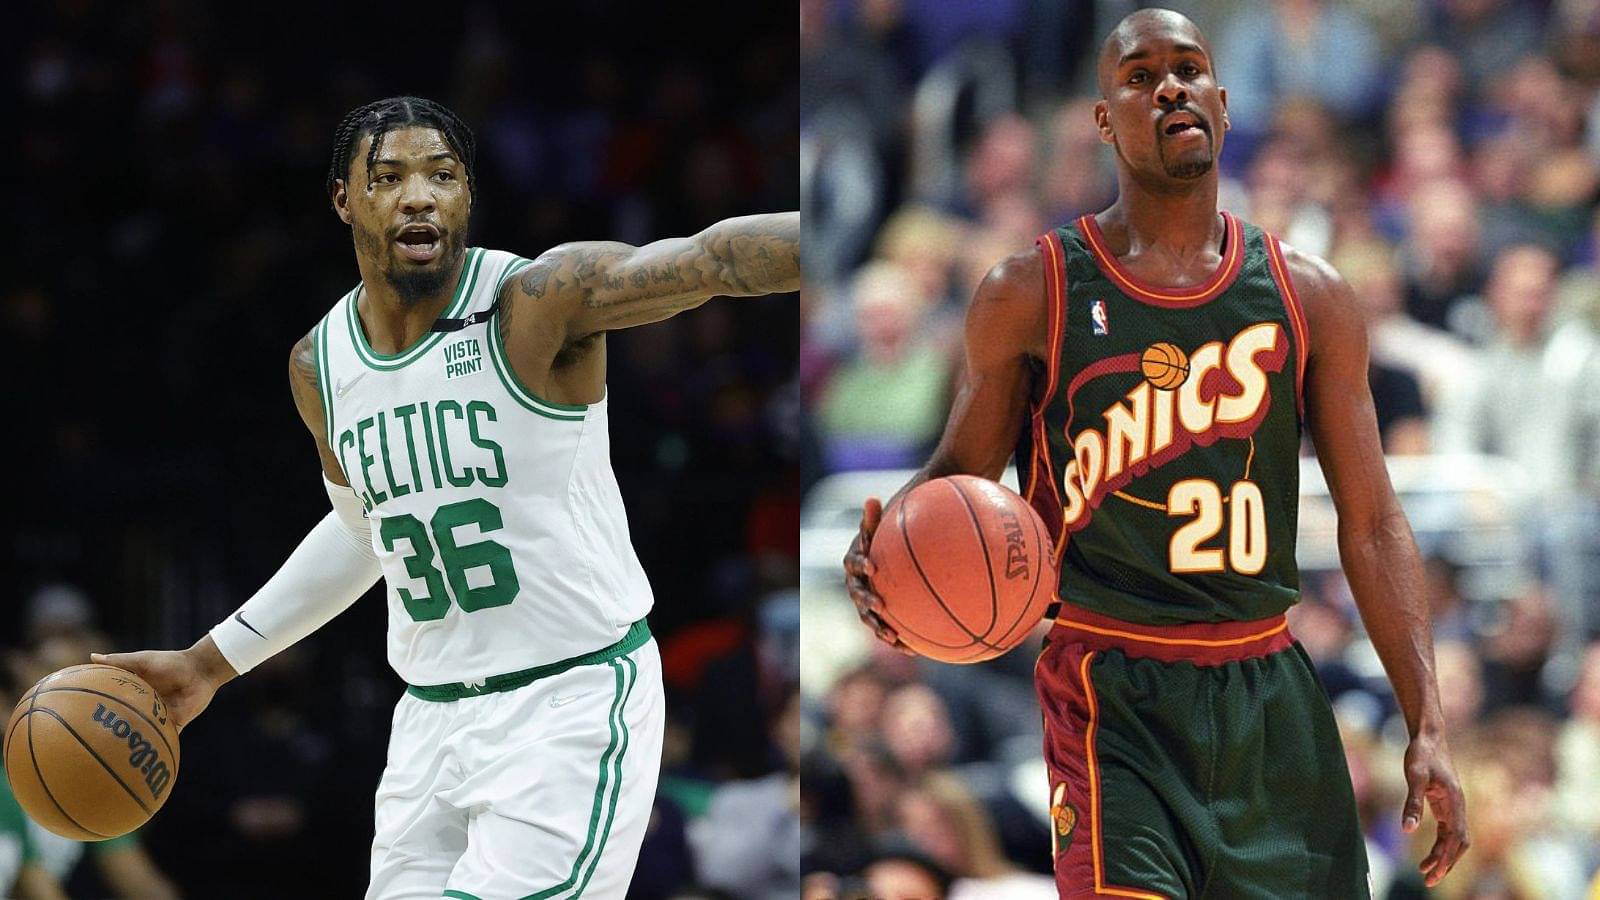 “Marcus Smart changed the game like I did in 1996”: Gary Payton has nothing but respect for the 2022 DPOY, praised Celtics guard ahead of Game 2